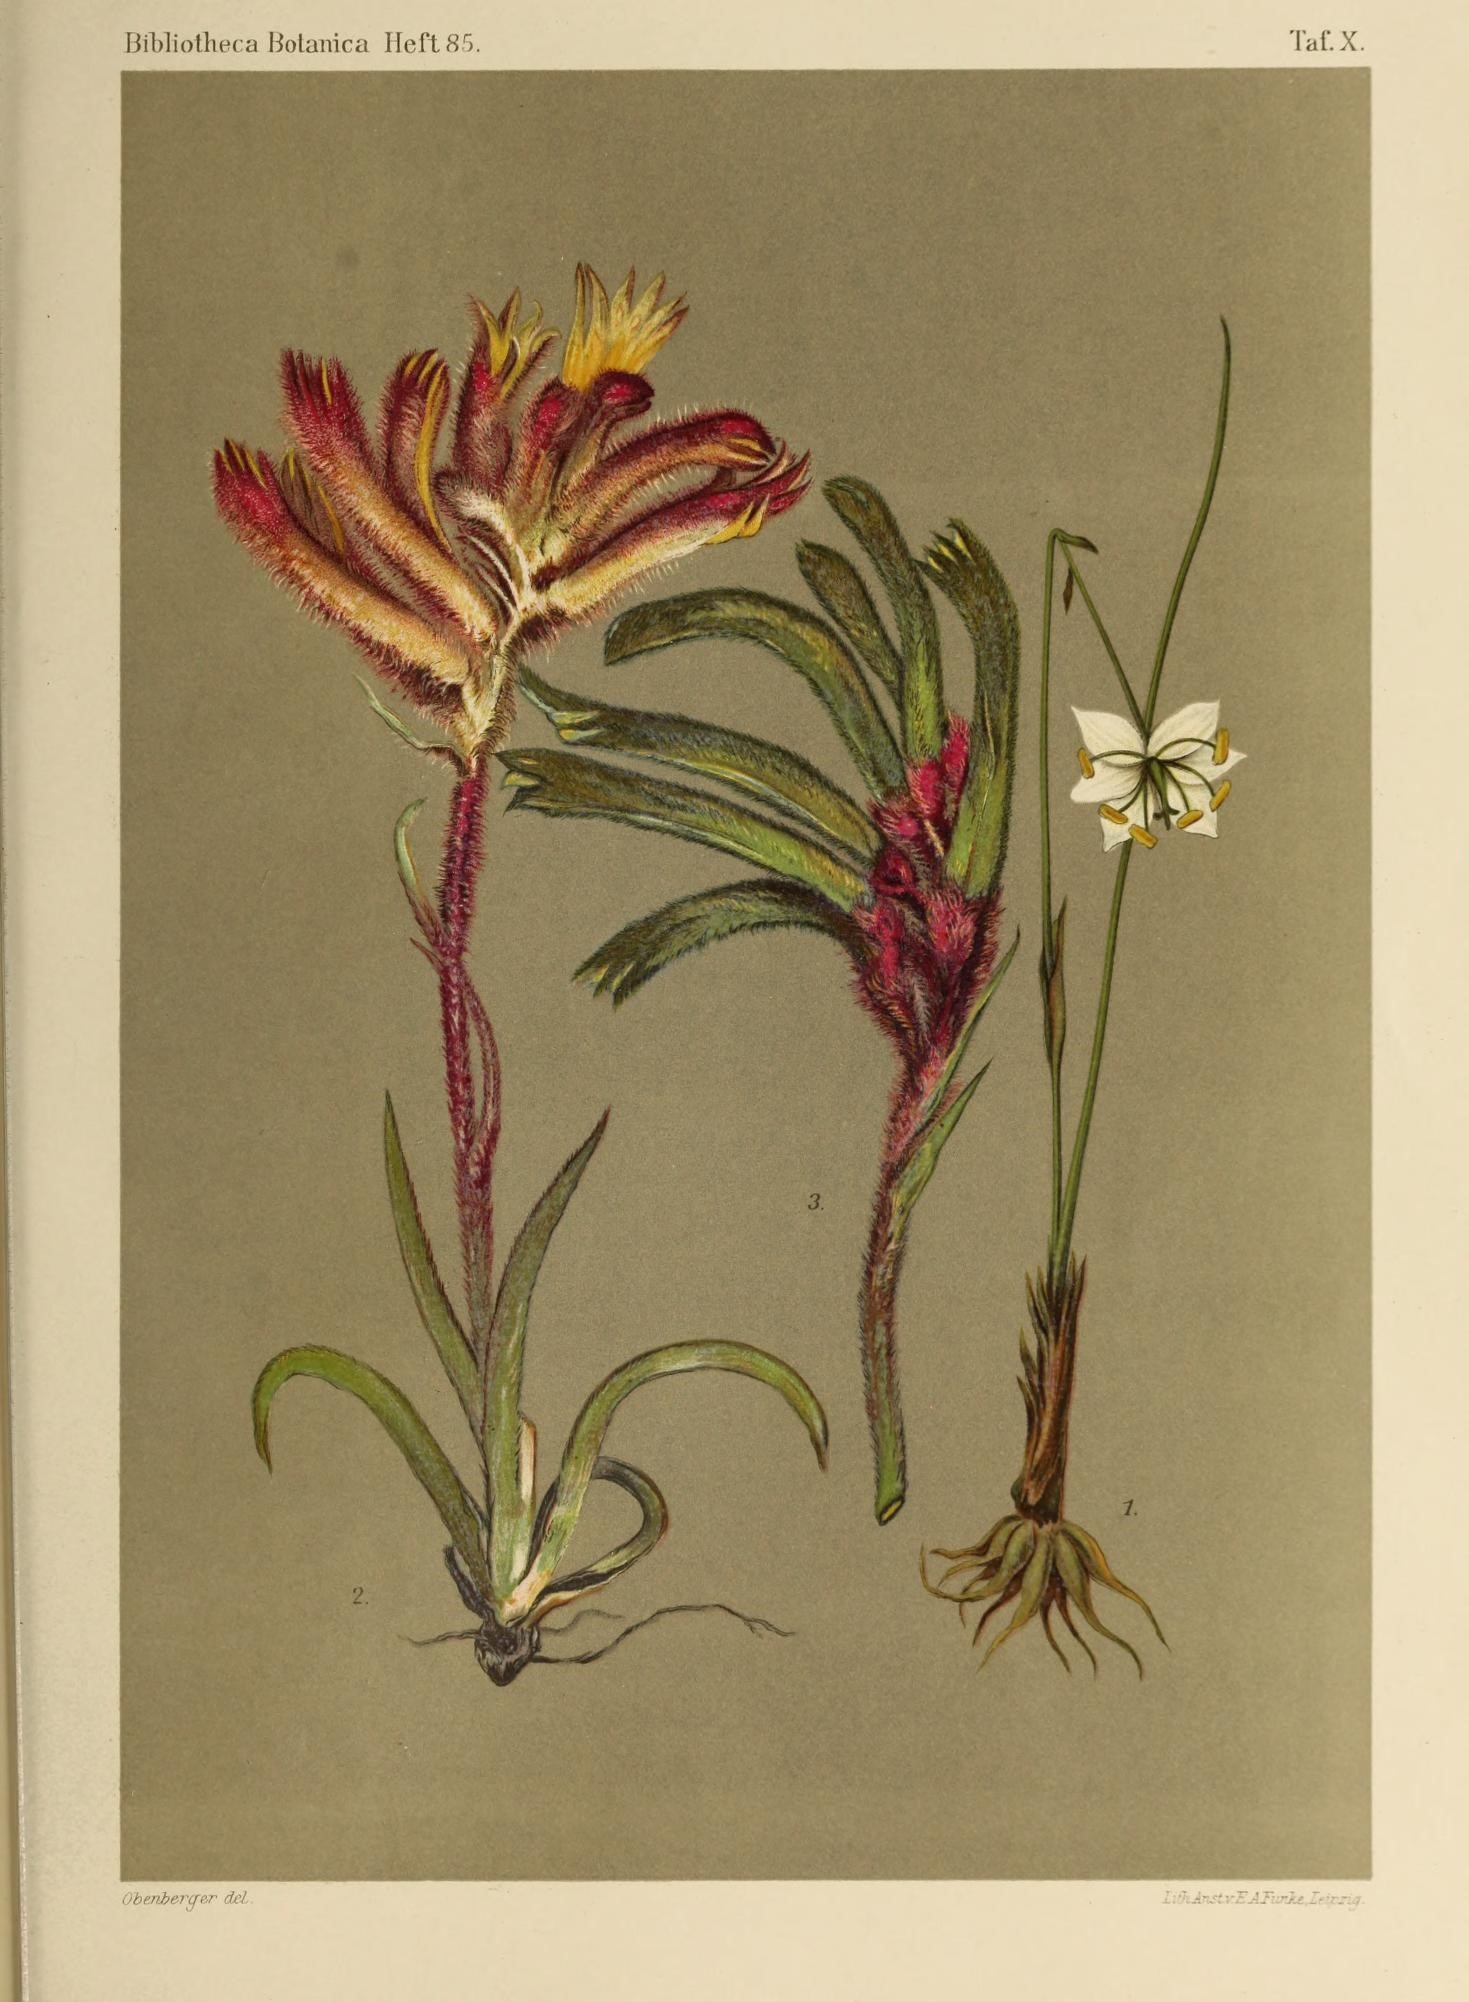 an illustration showing several different flowers and plants